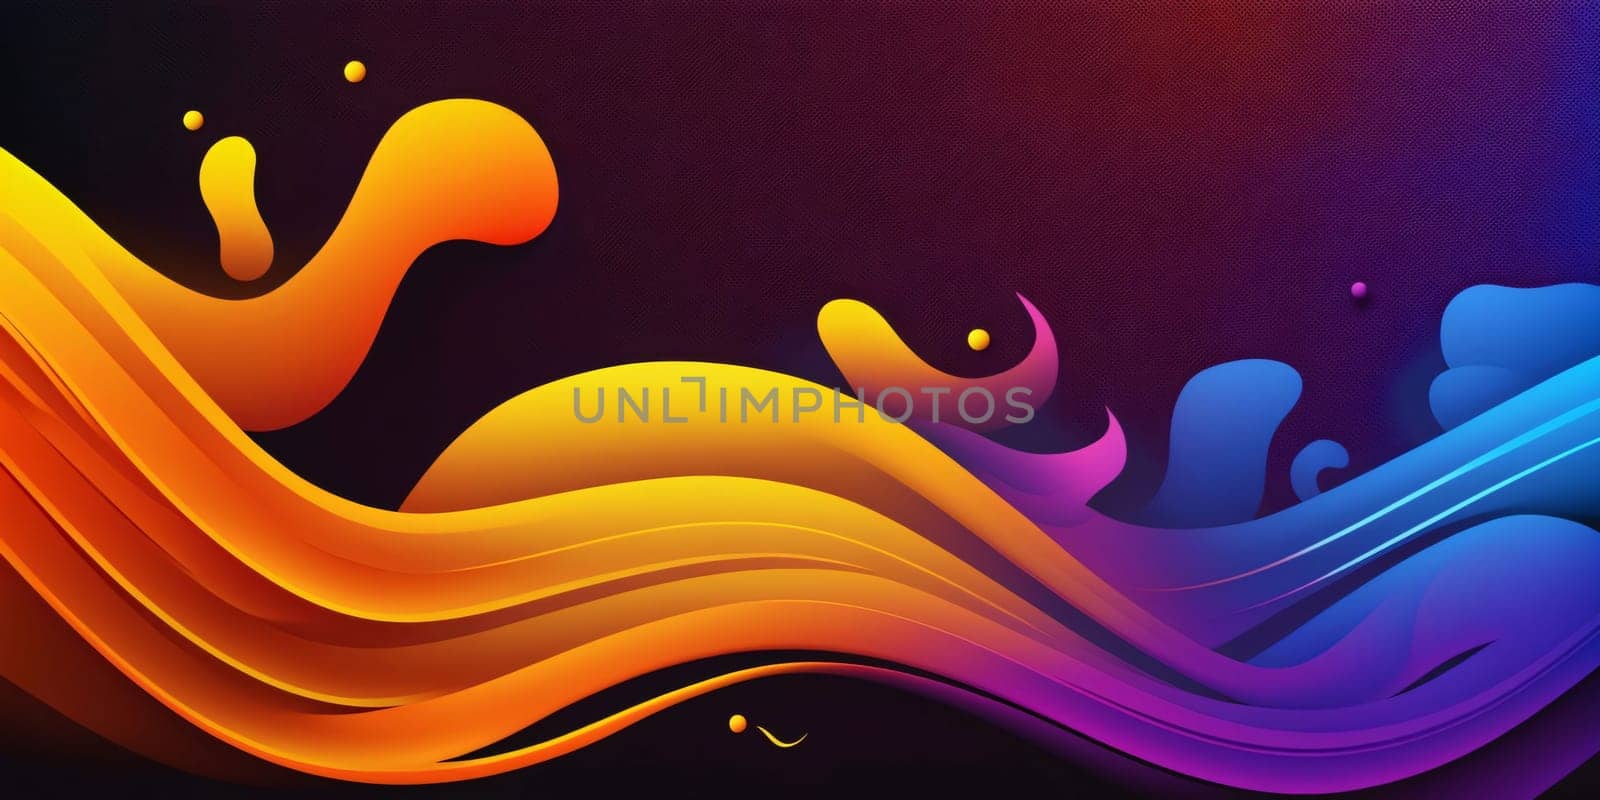 Abstract background design: abstract colorful background with wave. Vector illustration. Eps 10.